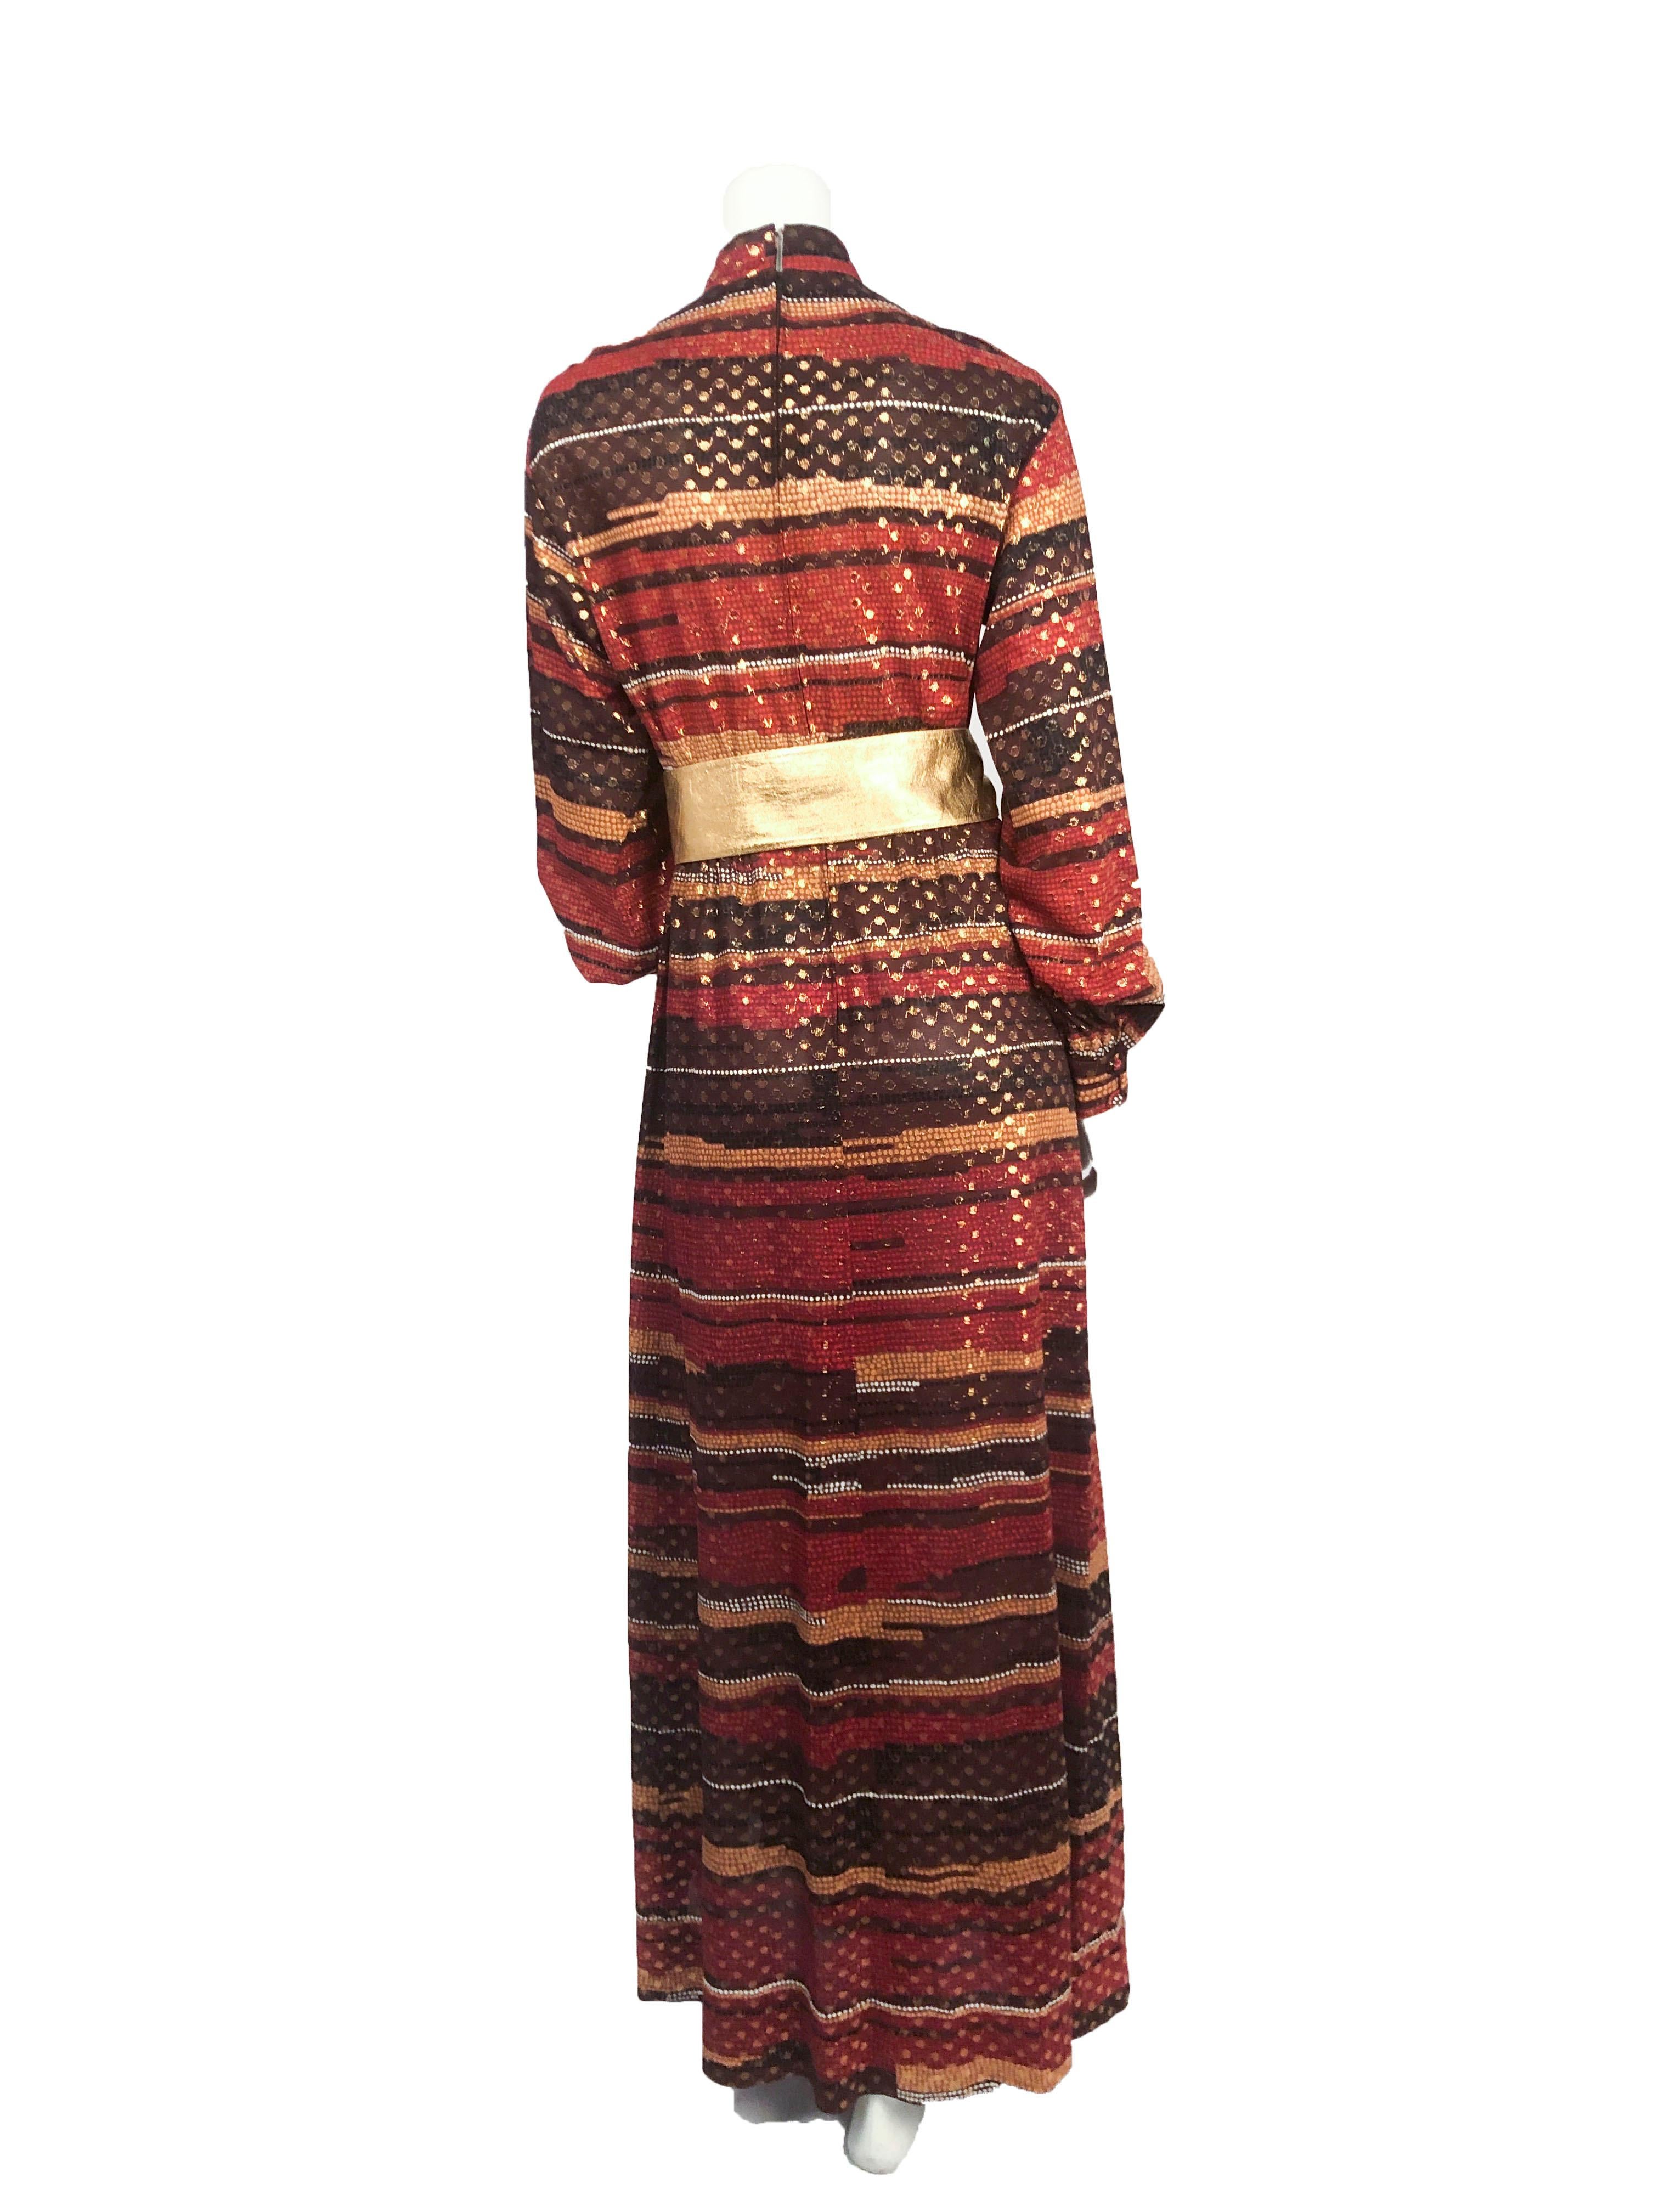 1970s Autumn Printed Full- length Dress with covered buttons, metallic Lurex textile, gathered/cuffed sleeves, nehru collar, and plackette collar accent. Styled with belt that is not included.